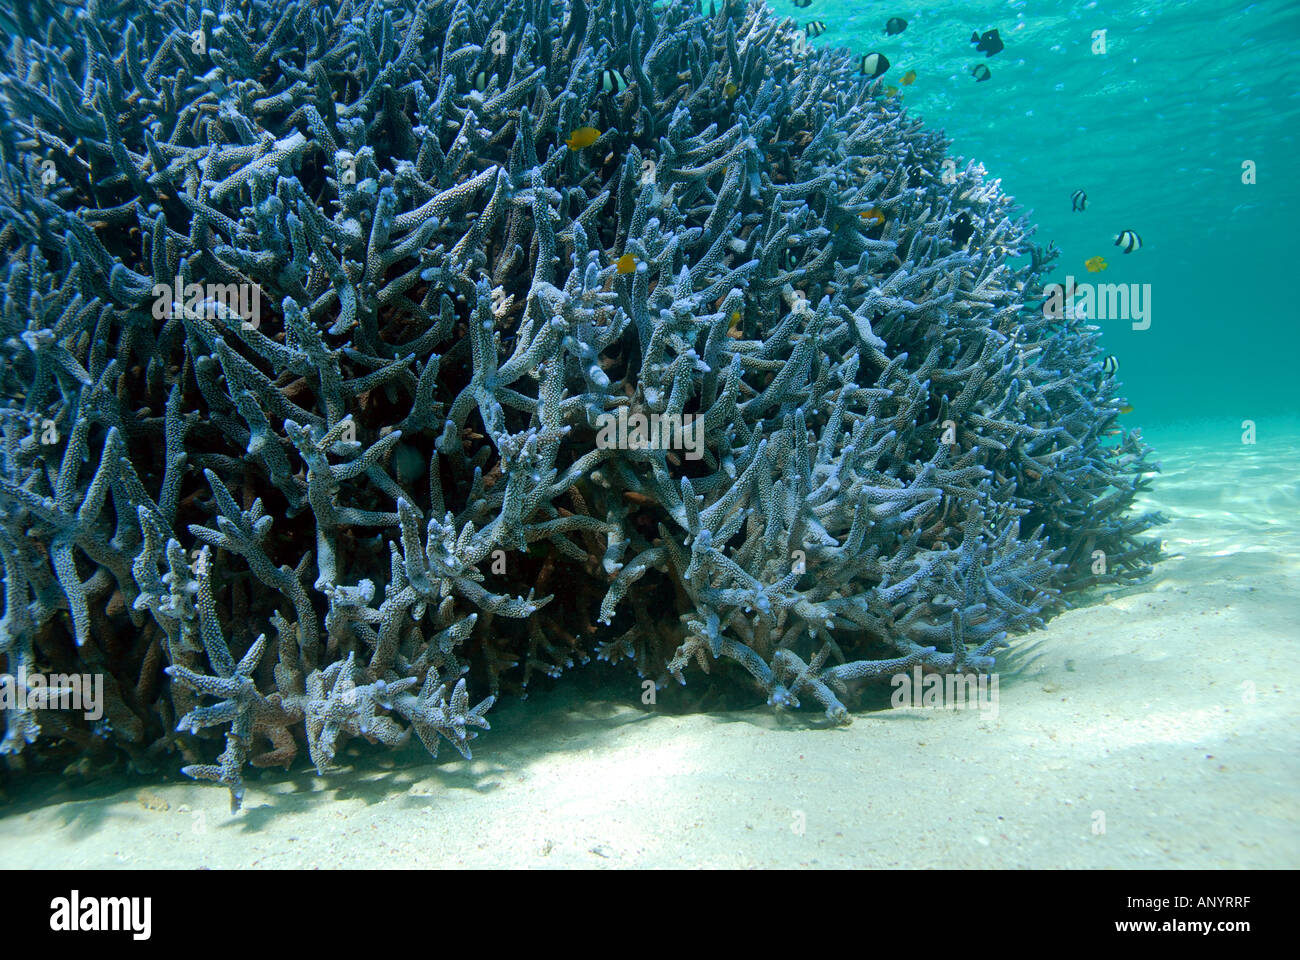 Healthy coral with fish in sheltered lagoon environment Stock Photo